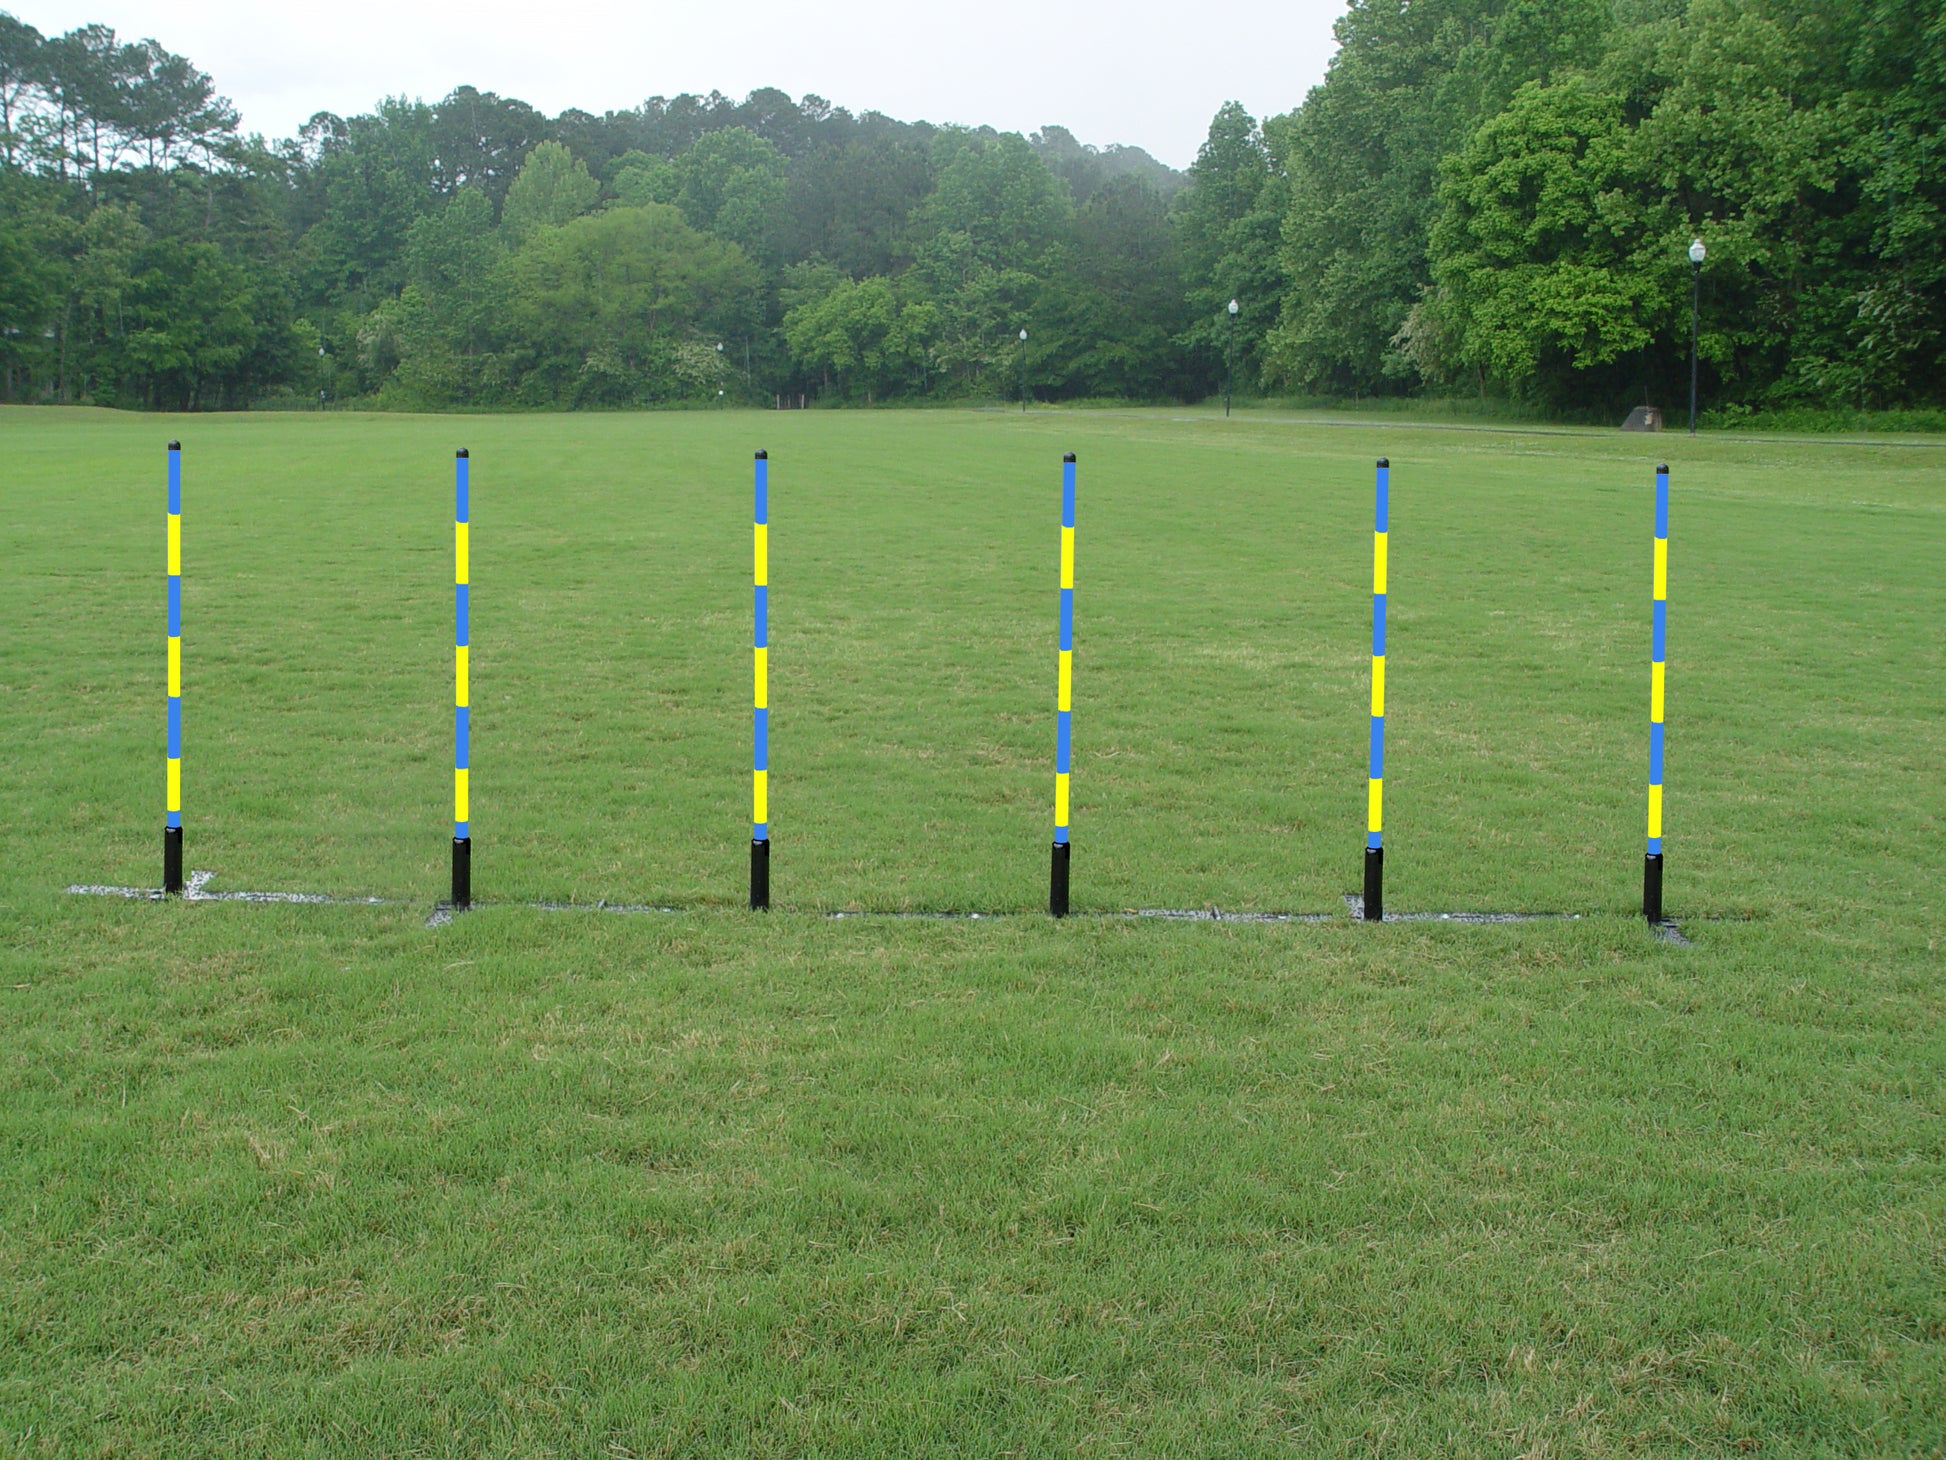 6 Pole Weave Poles with Adjustable Pole Spacing From 19" to 25" - Dog Agility USA